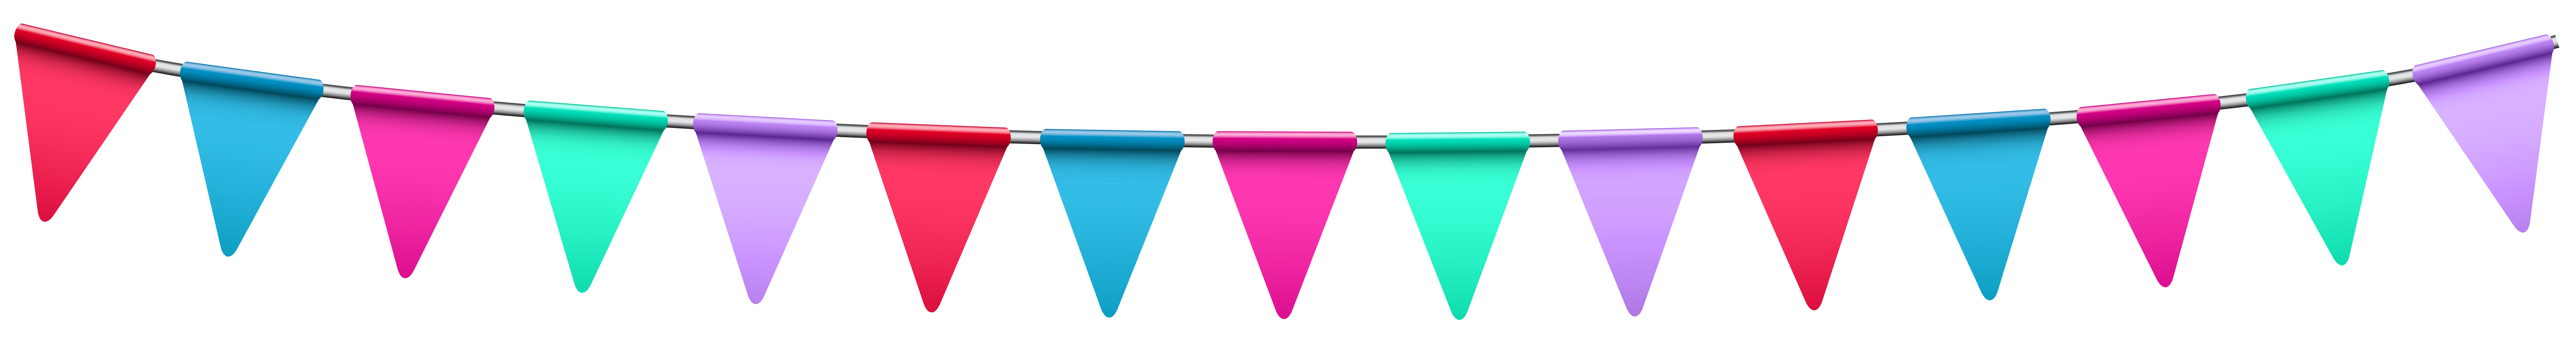 Streamers clipart triangle. Colorful streamer png clip